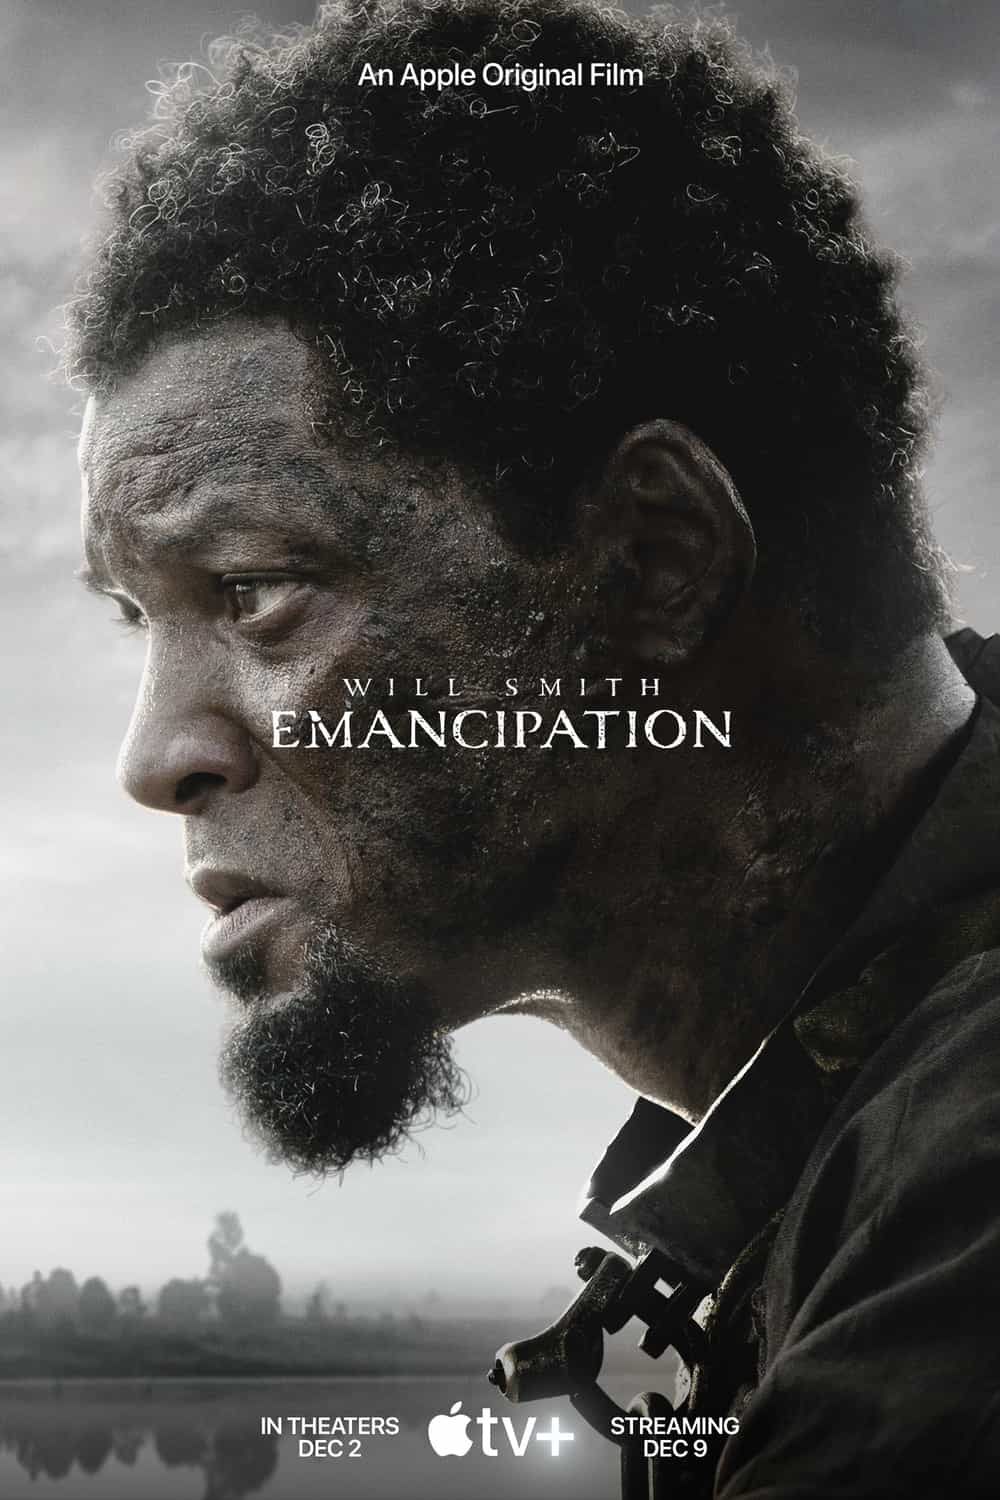 Emancipation is given a 15 age rating in the UK for strong violence, injury detail, racism, brief sexual threat